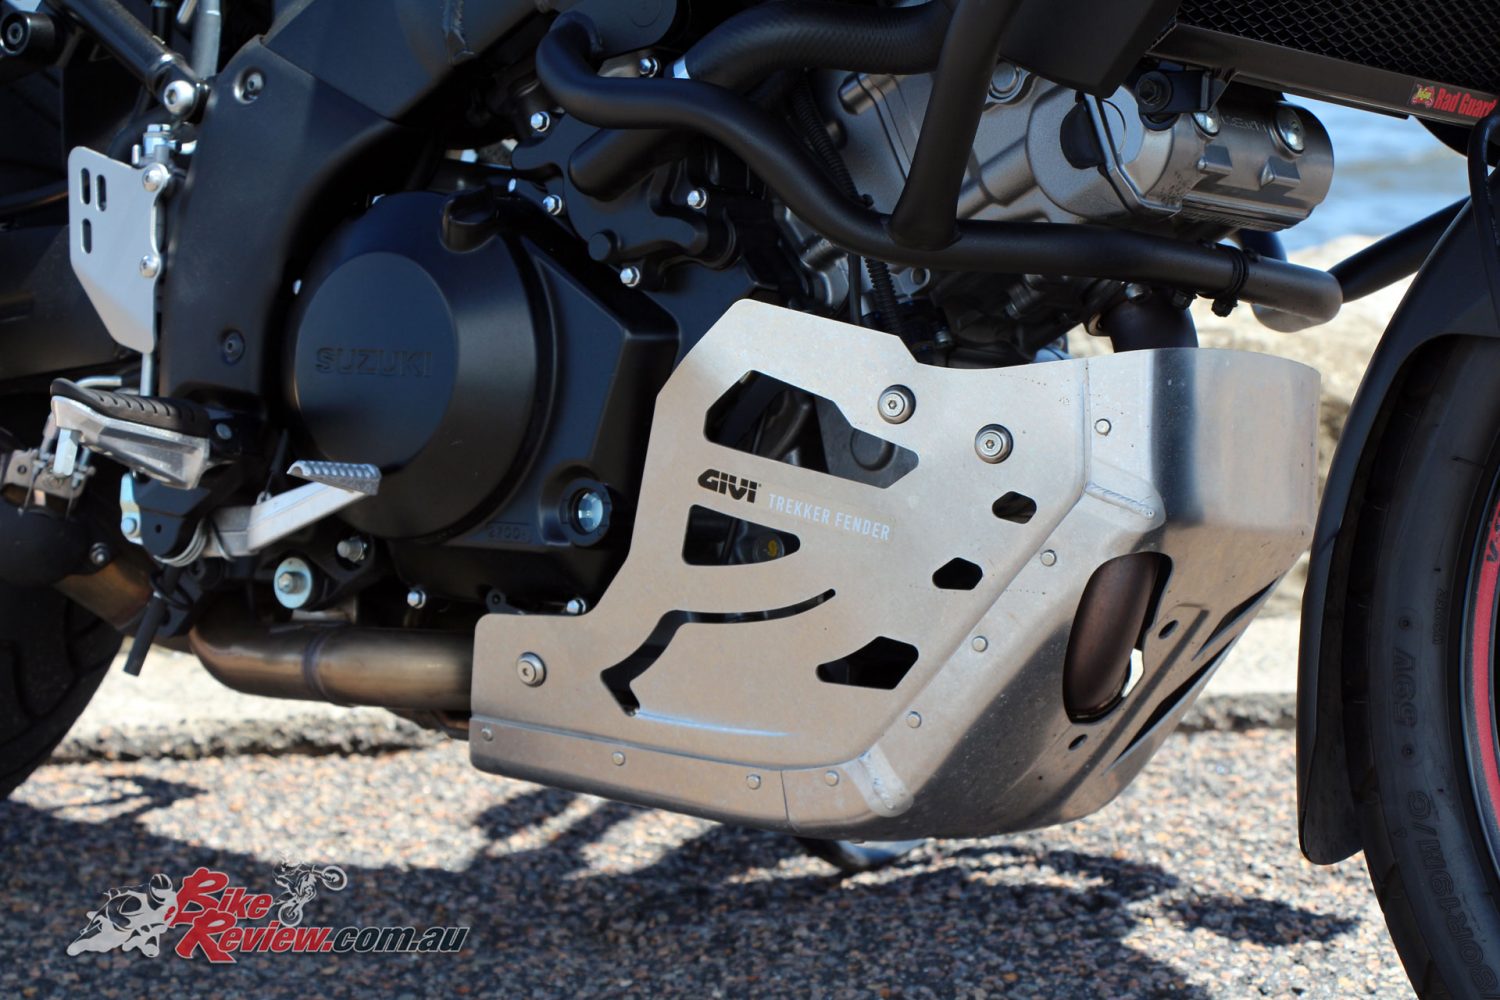 Givi Skid Plate fitted to John's V-Strom 1000, along with crash bars and running lights